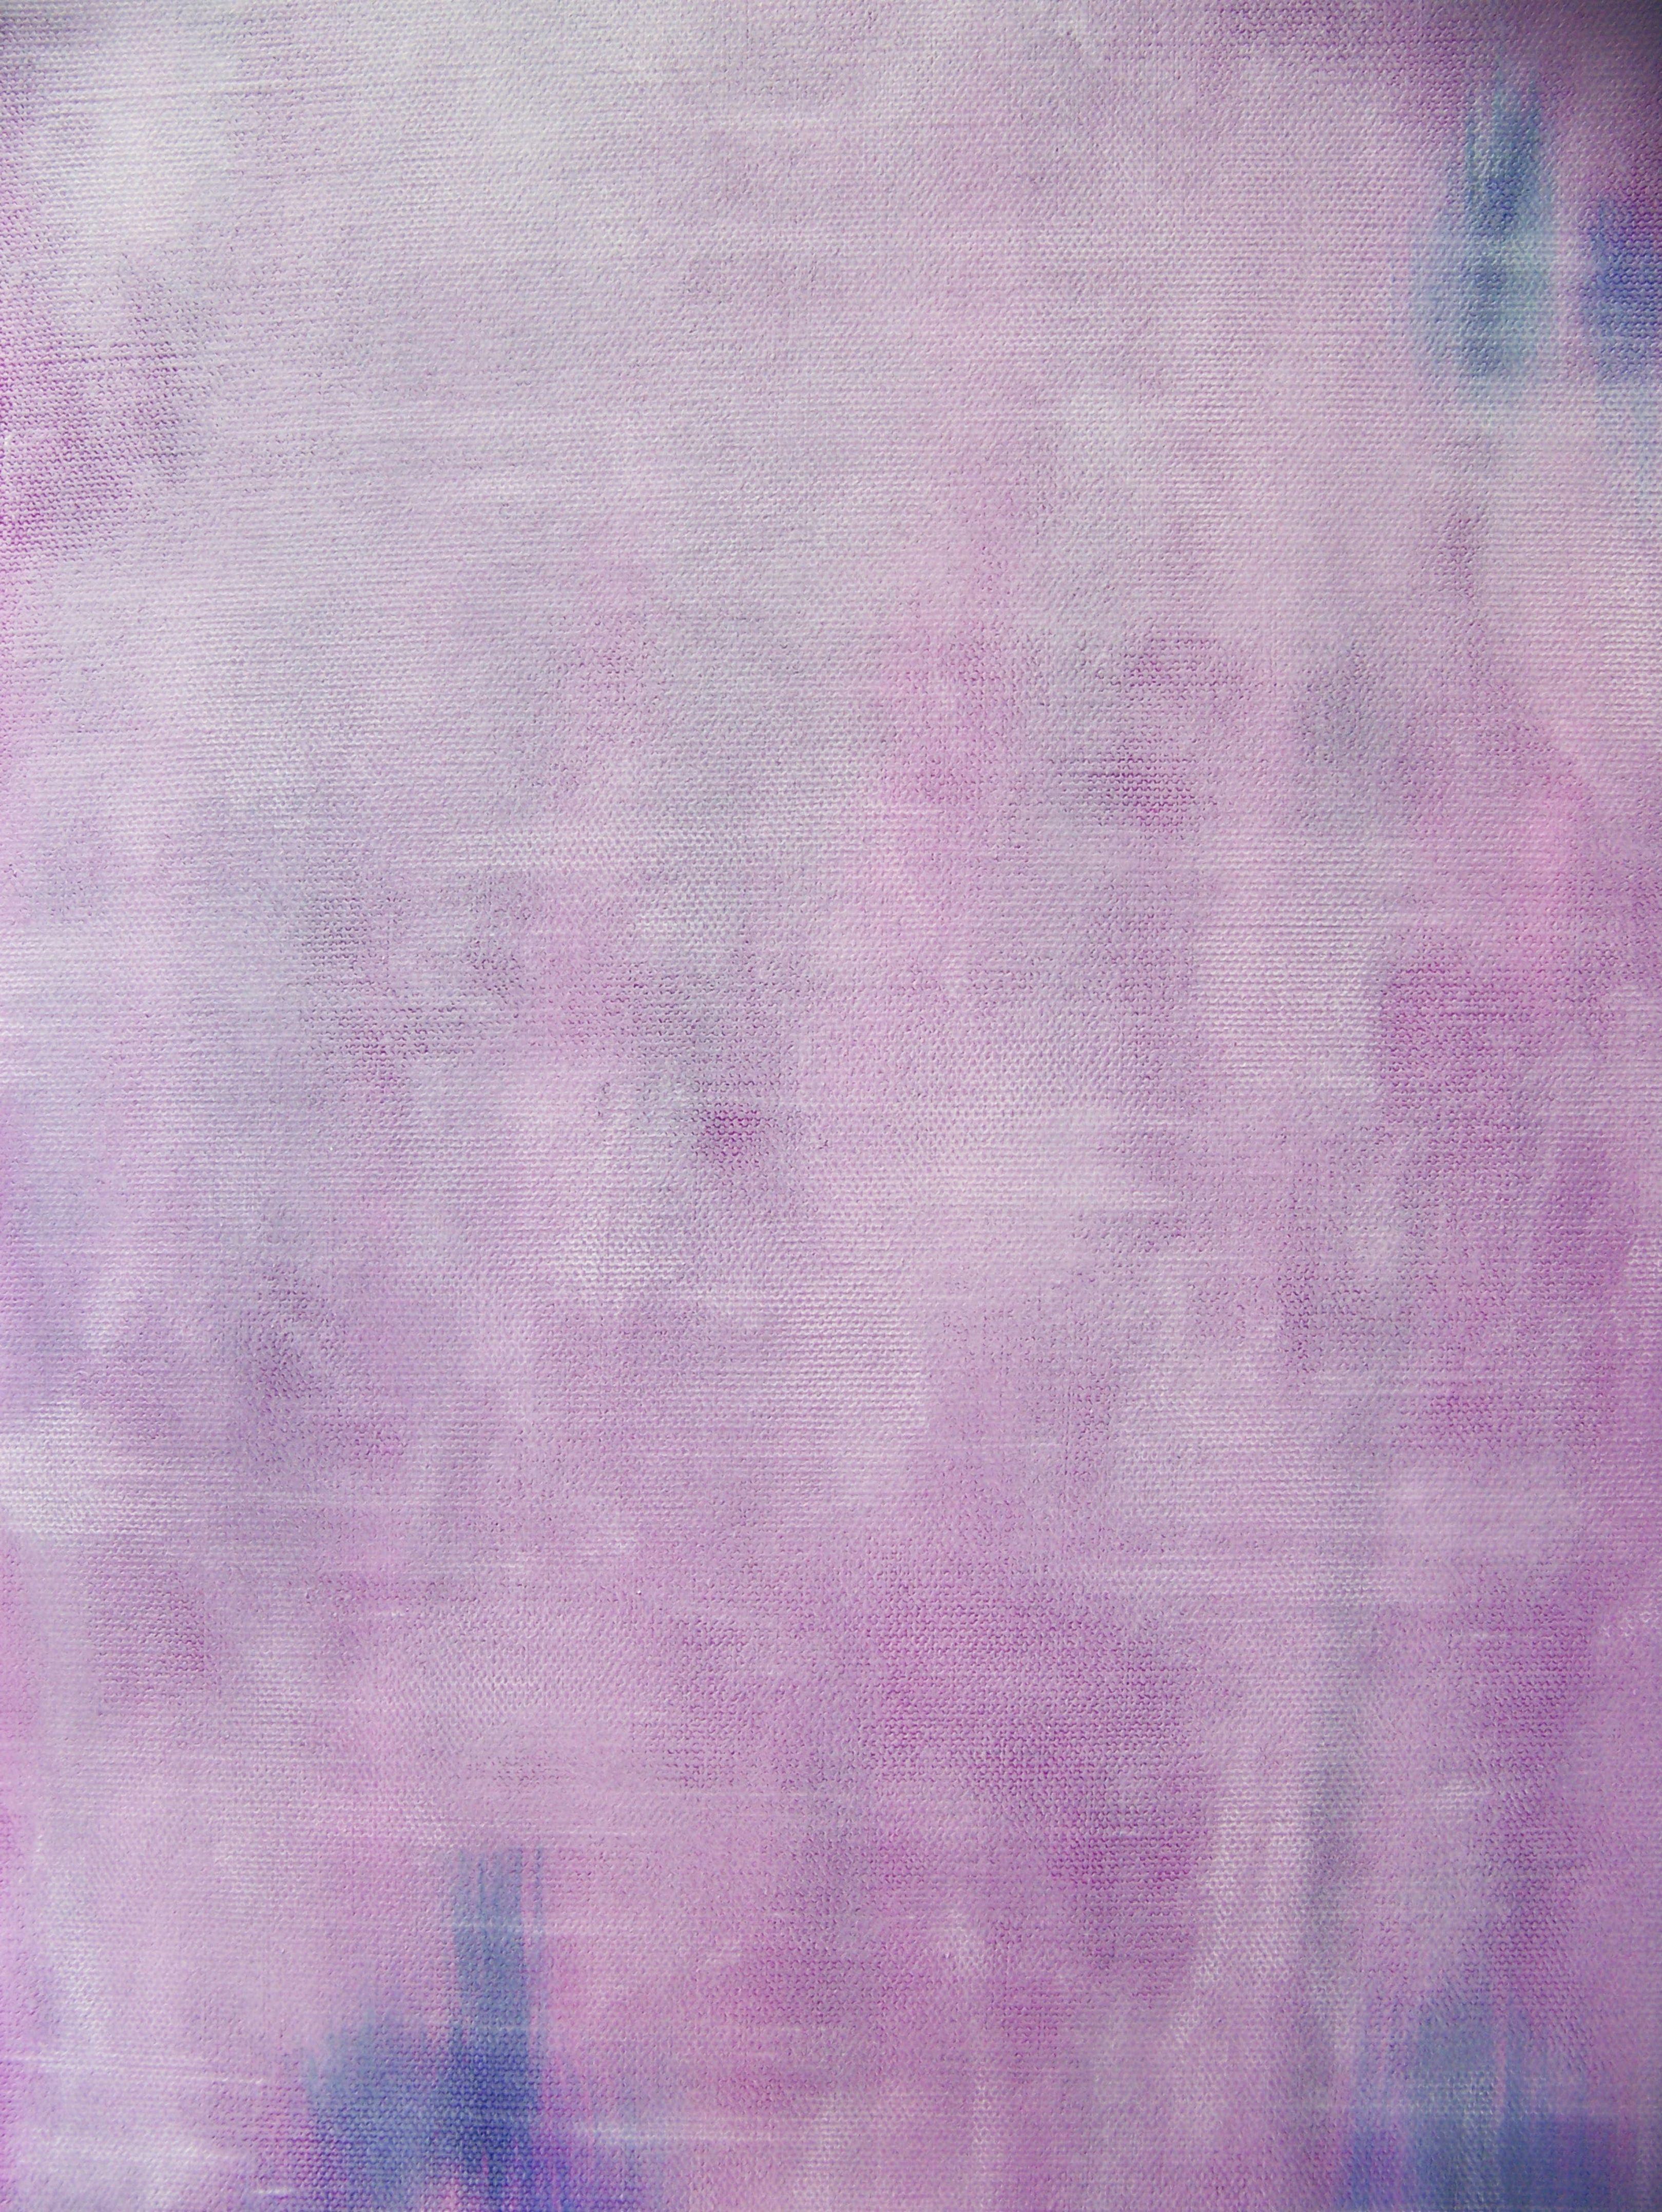 Lavender Ice, Painting, Oil on Canvas 3